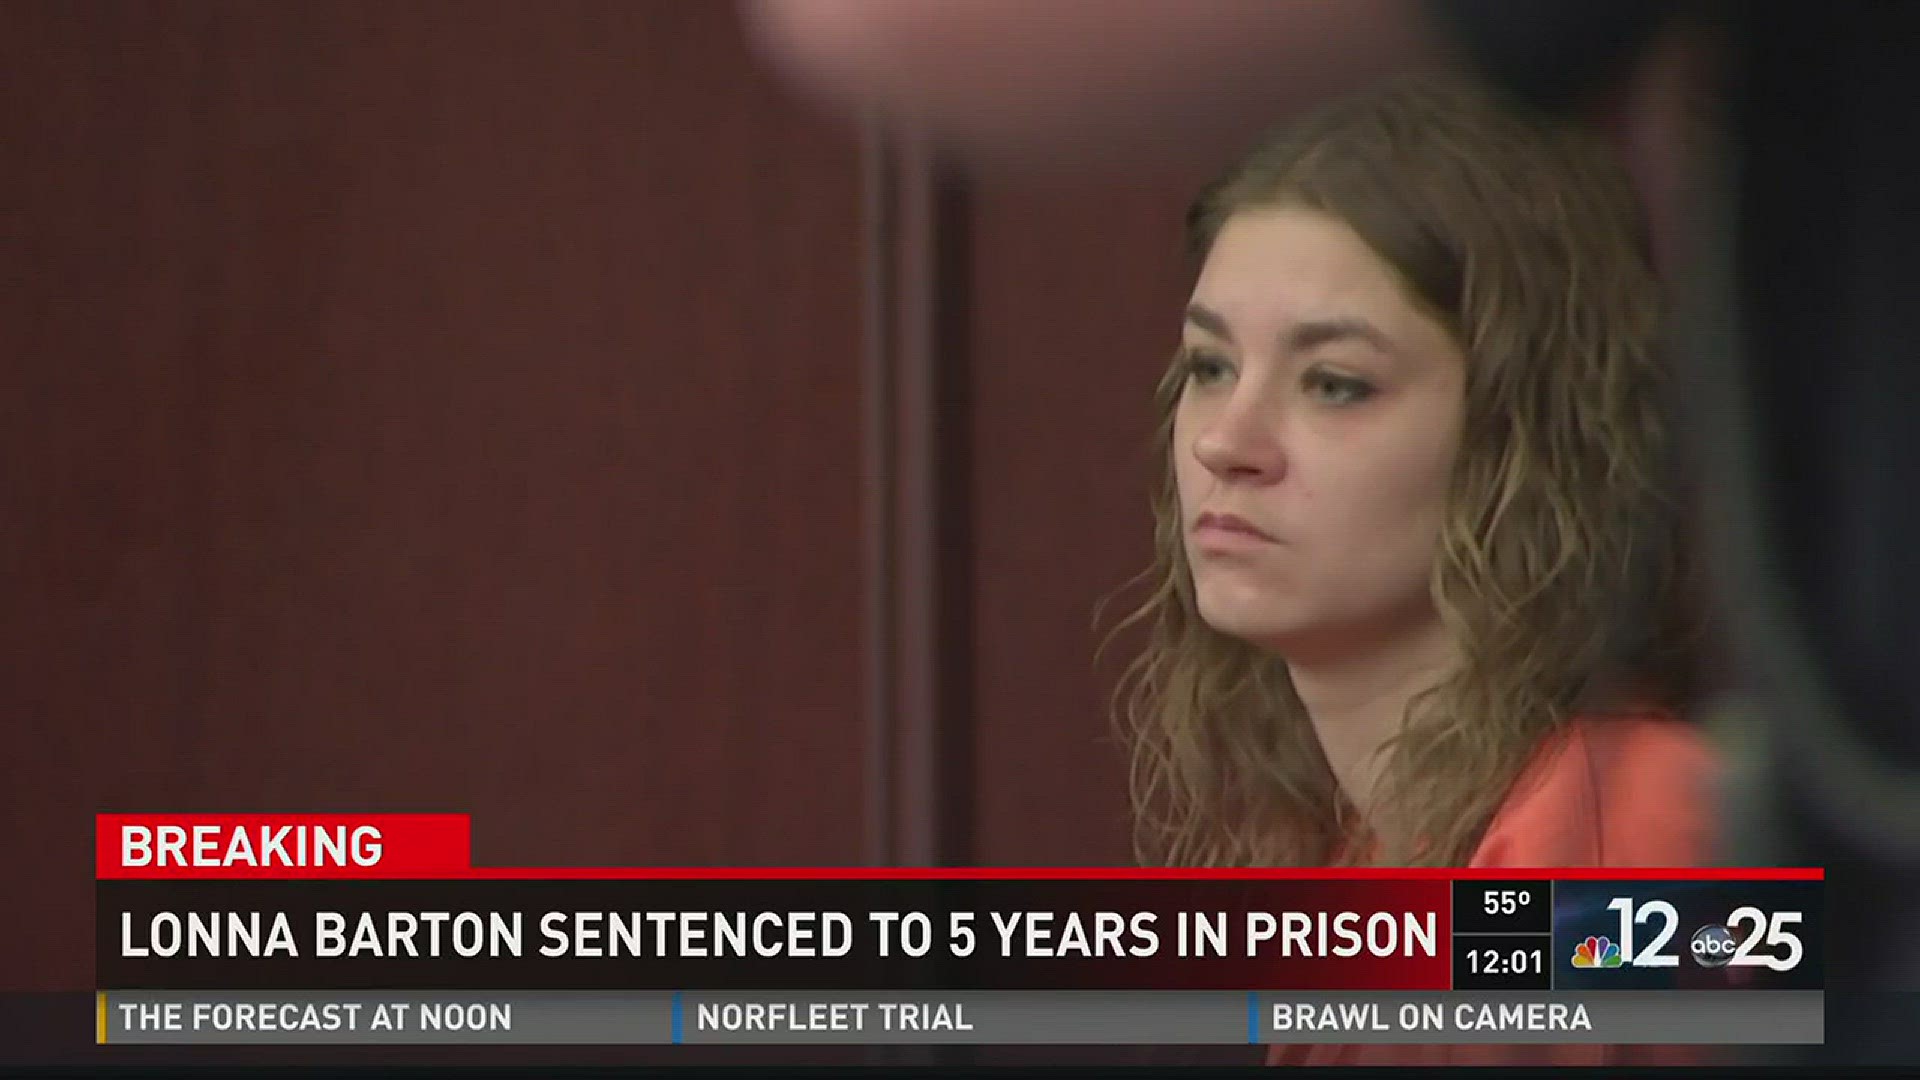 Lonna Barton sentenced to 5 years in prison